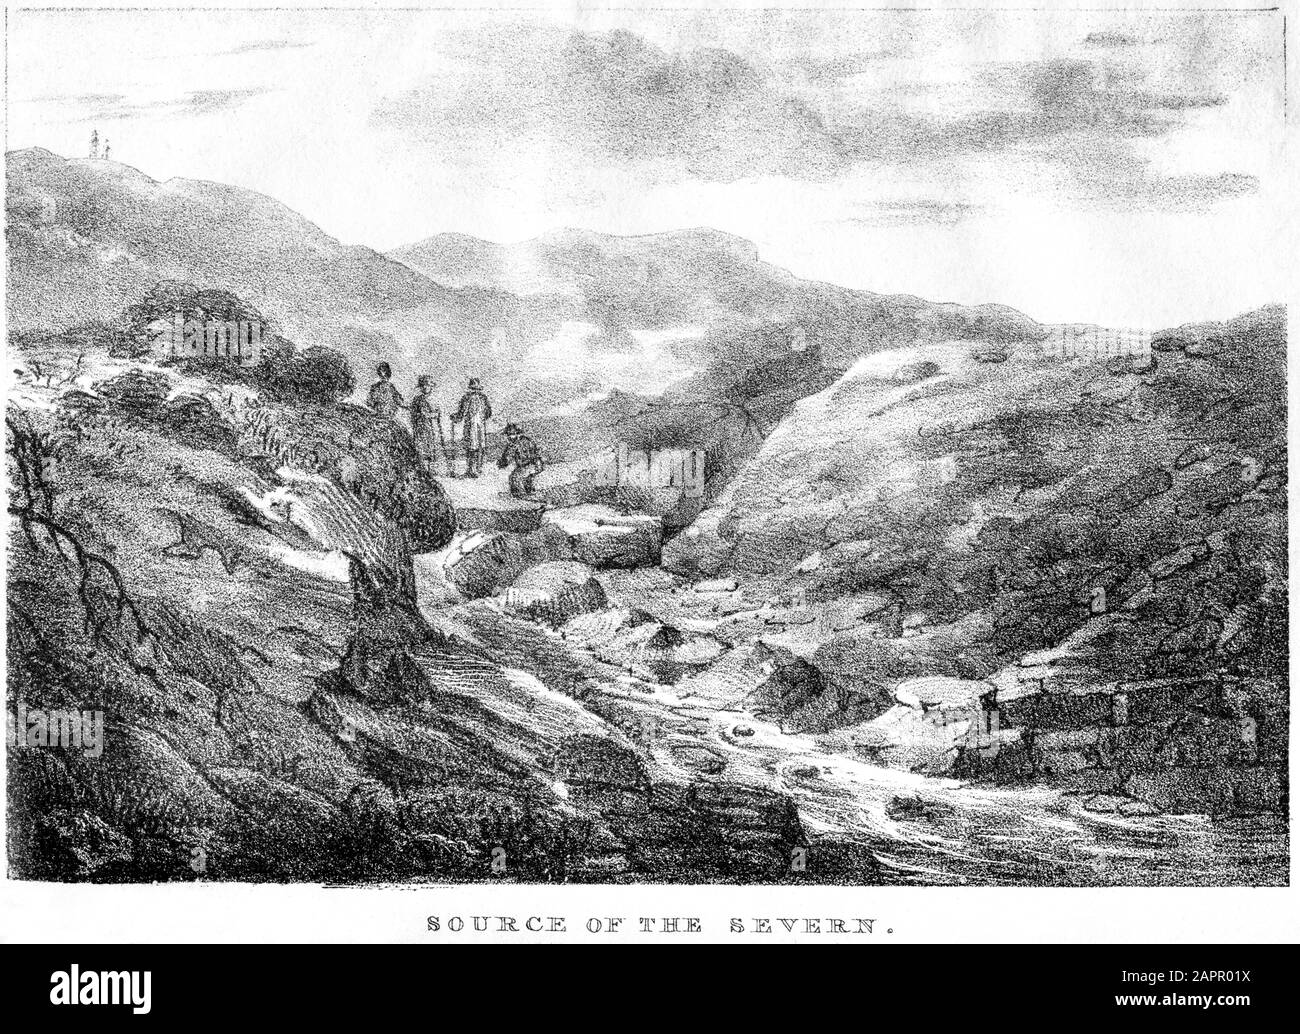 A lithograph of the Source of the River Severn scanned at high resolution. from a book printed in 1824. Believed copyright free. Stock Photo